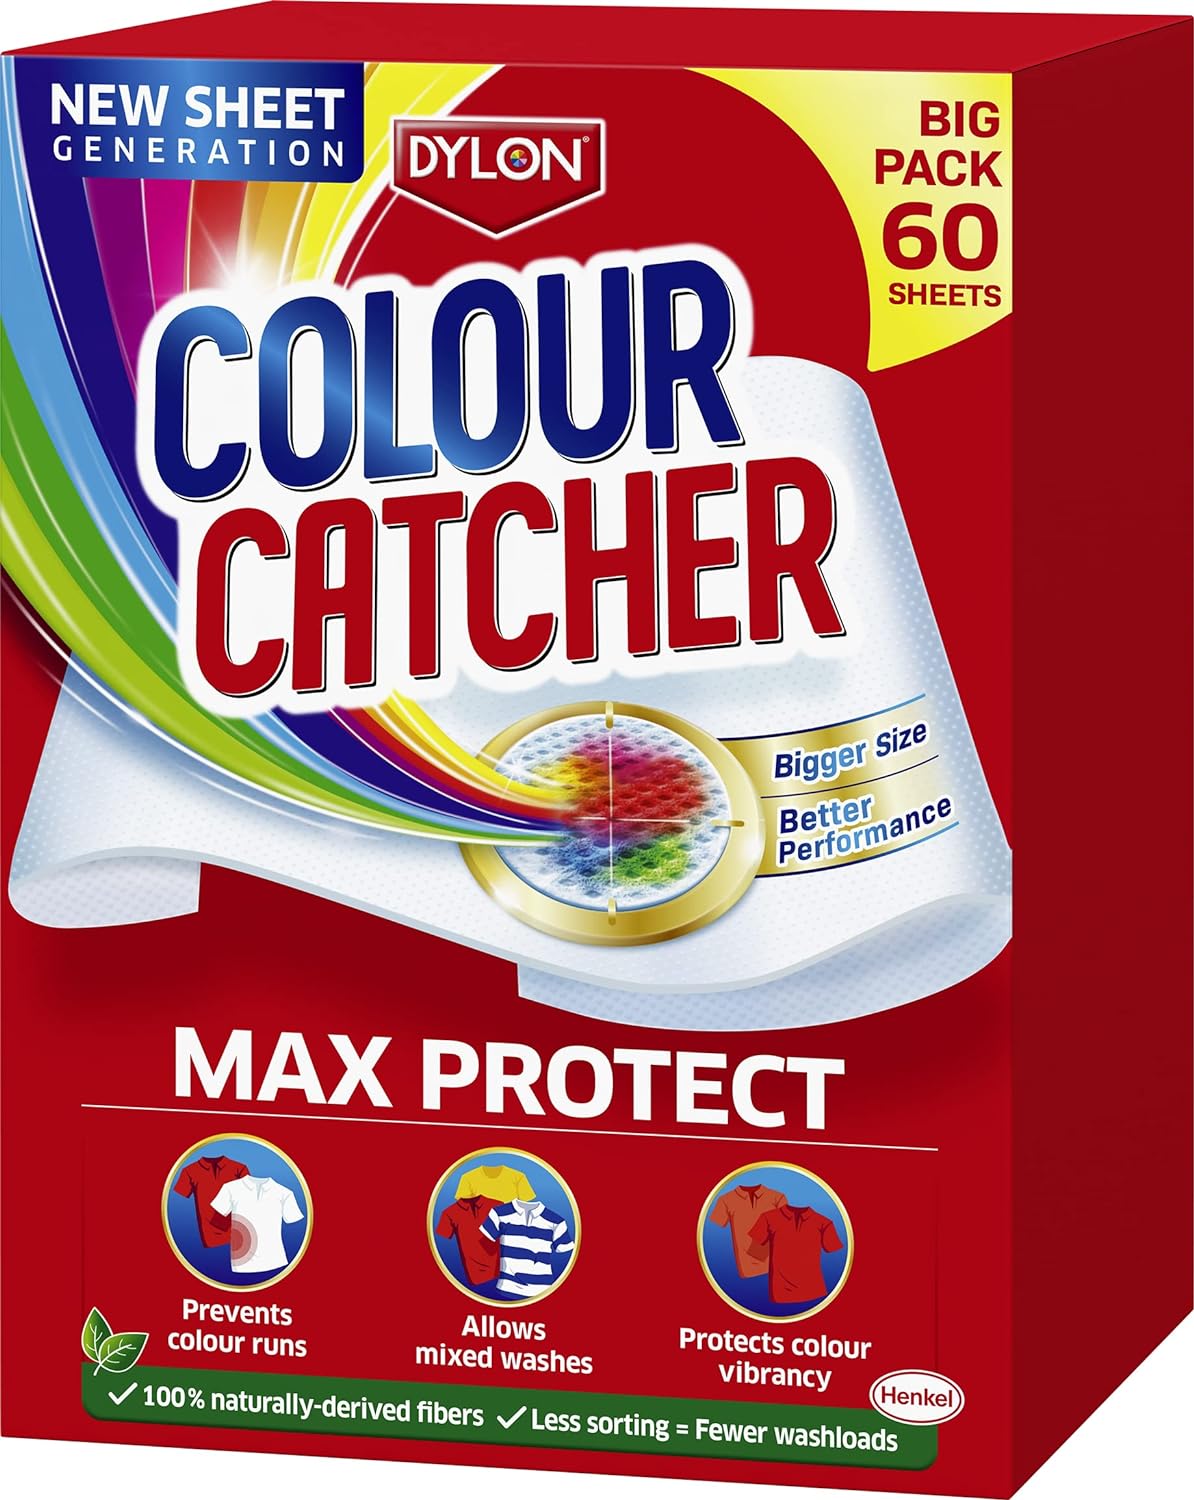 Dylon Colour Catcher Max Protection Sheets - Pack of 60